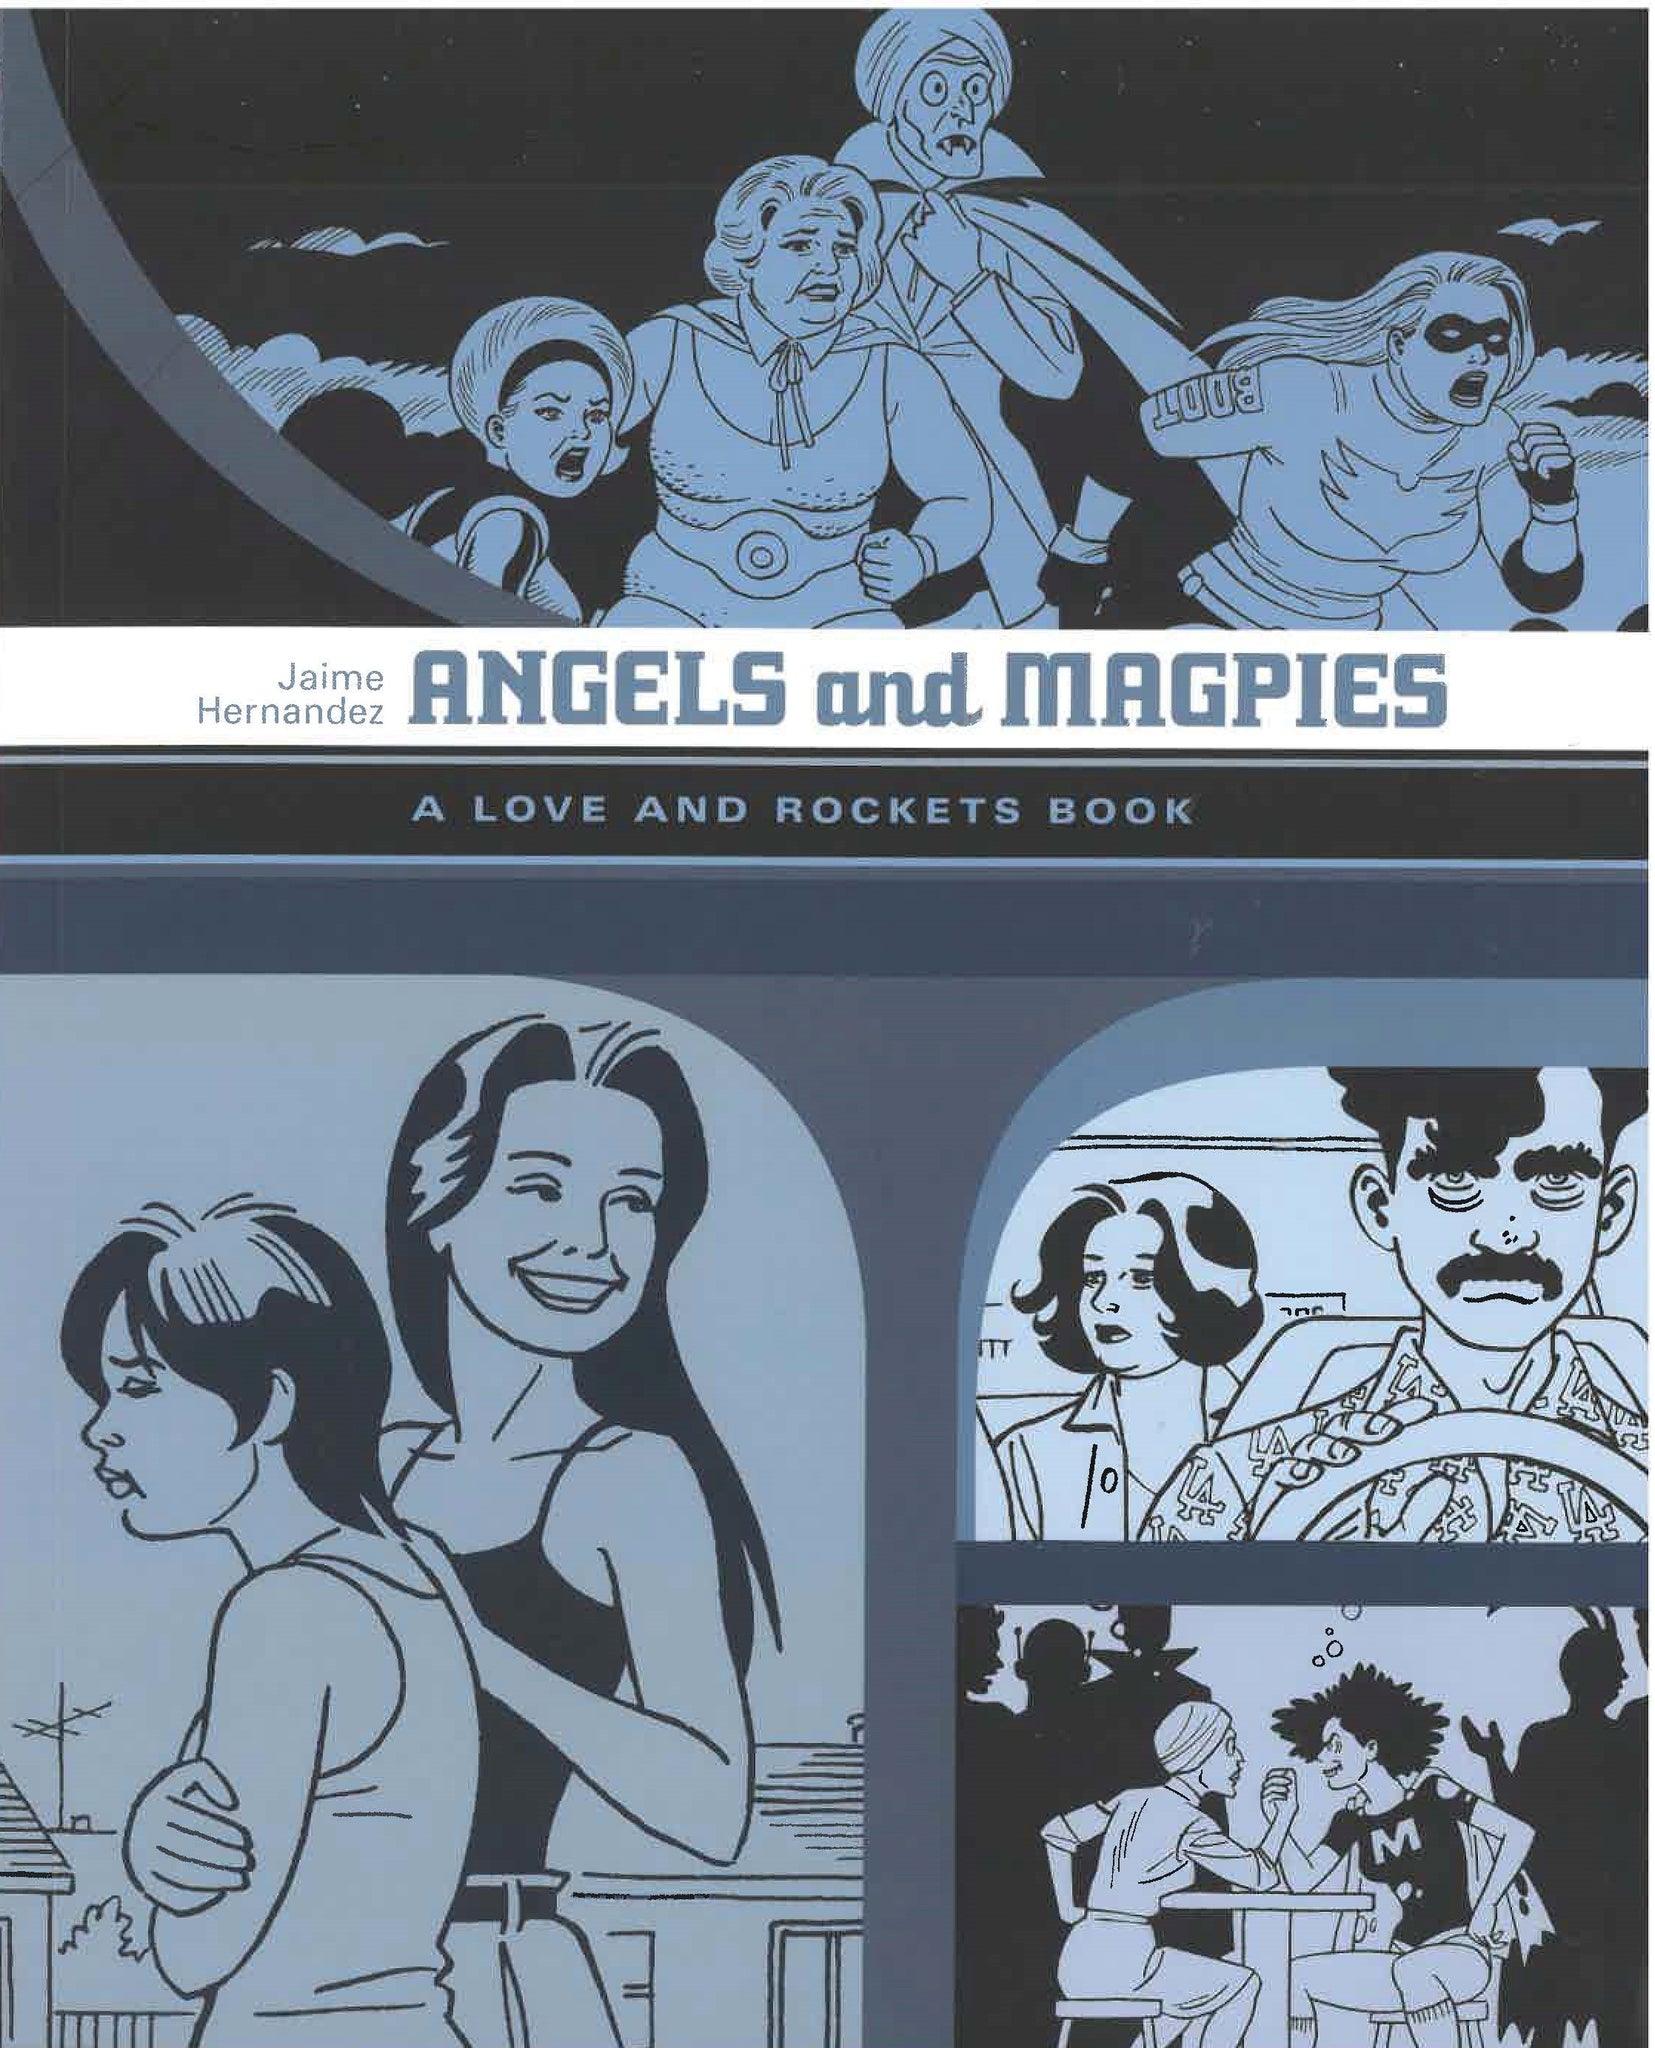 Angels and Magpies: A Love and Rockets Book by Jaime Hernandez